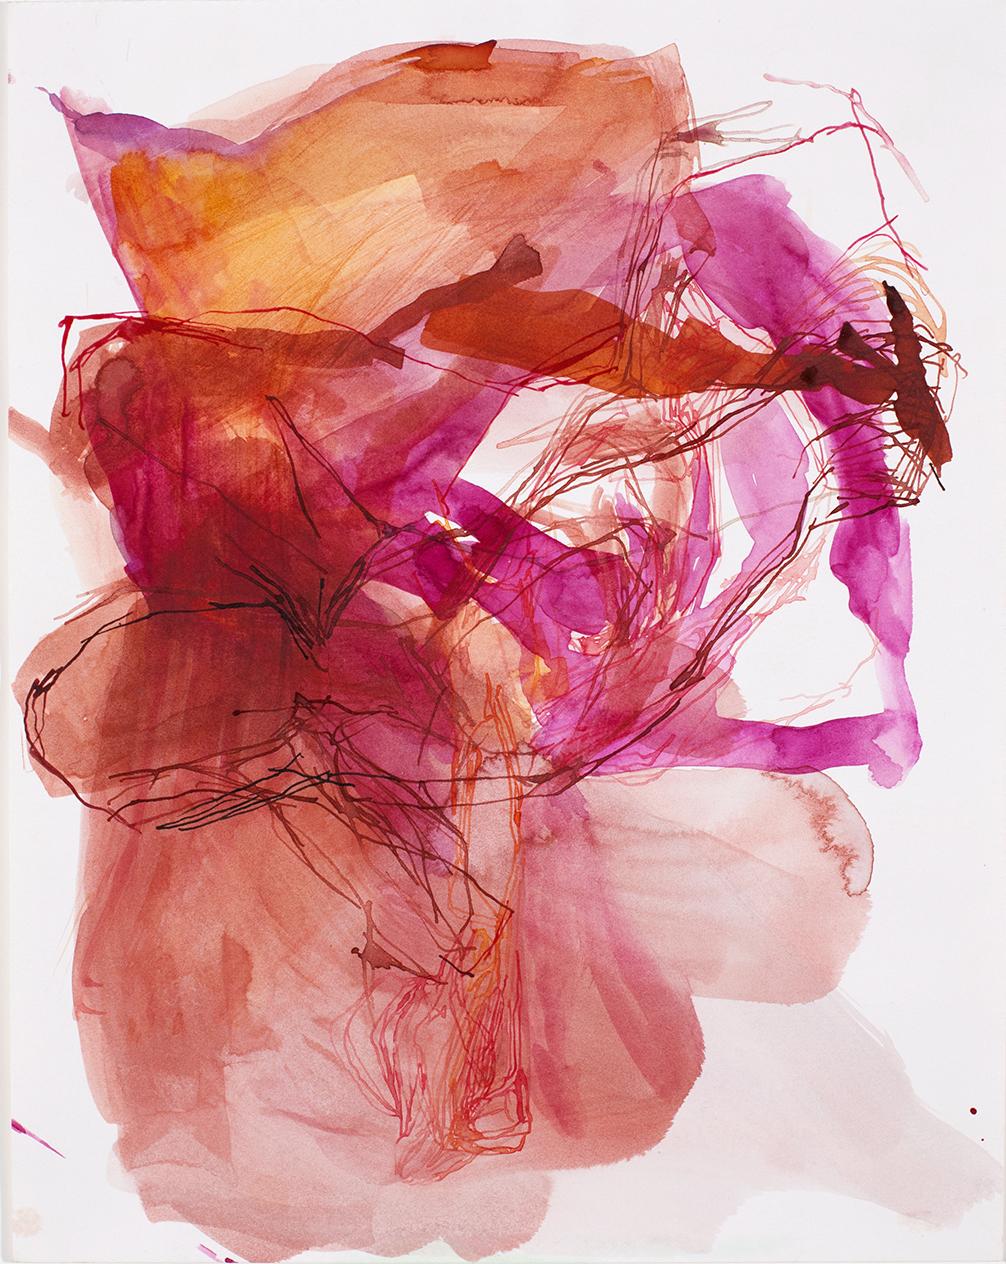 Elizabeth Gilfilen Abstract Print - Trunk Study #22 - Colorful ink on paper edition with Archival Pigment Print